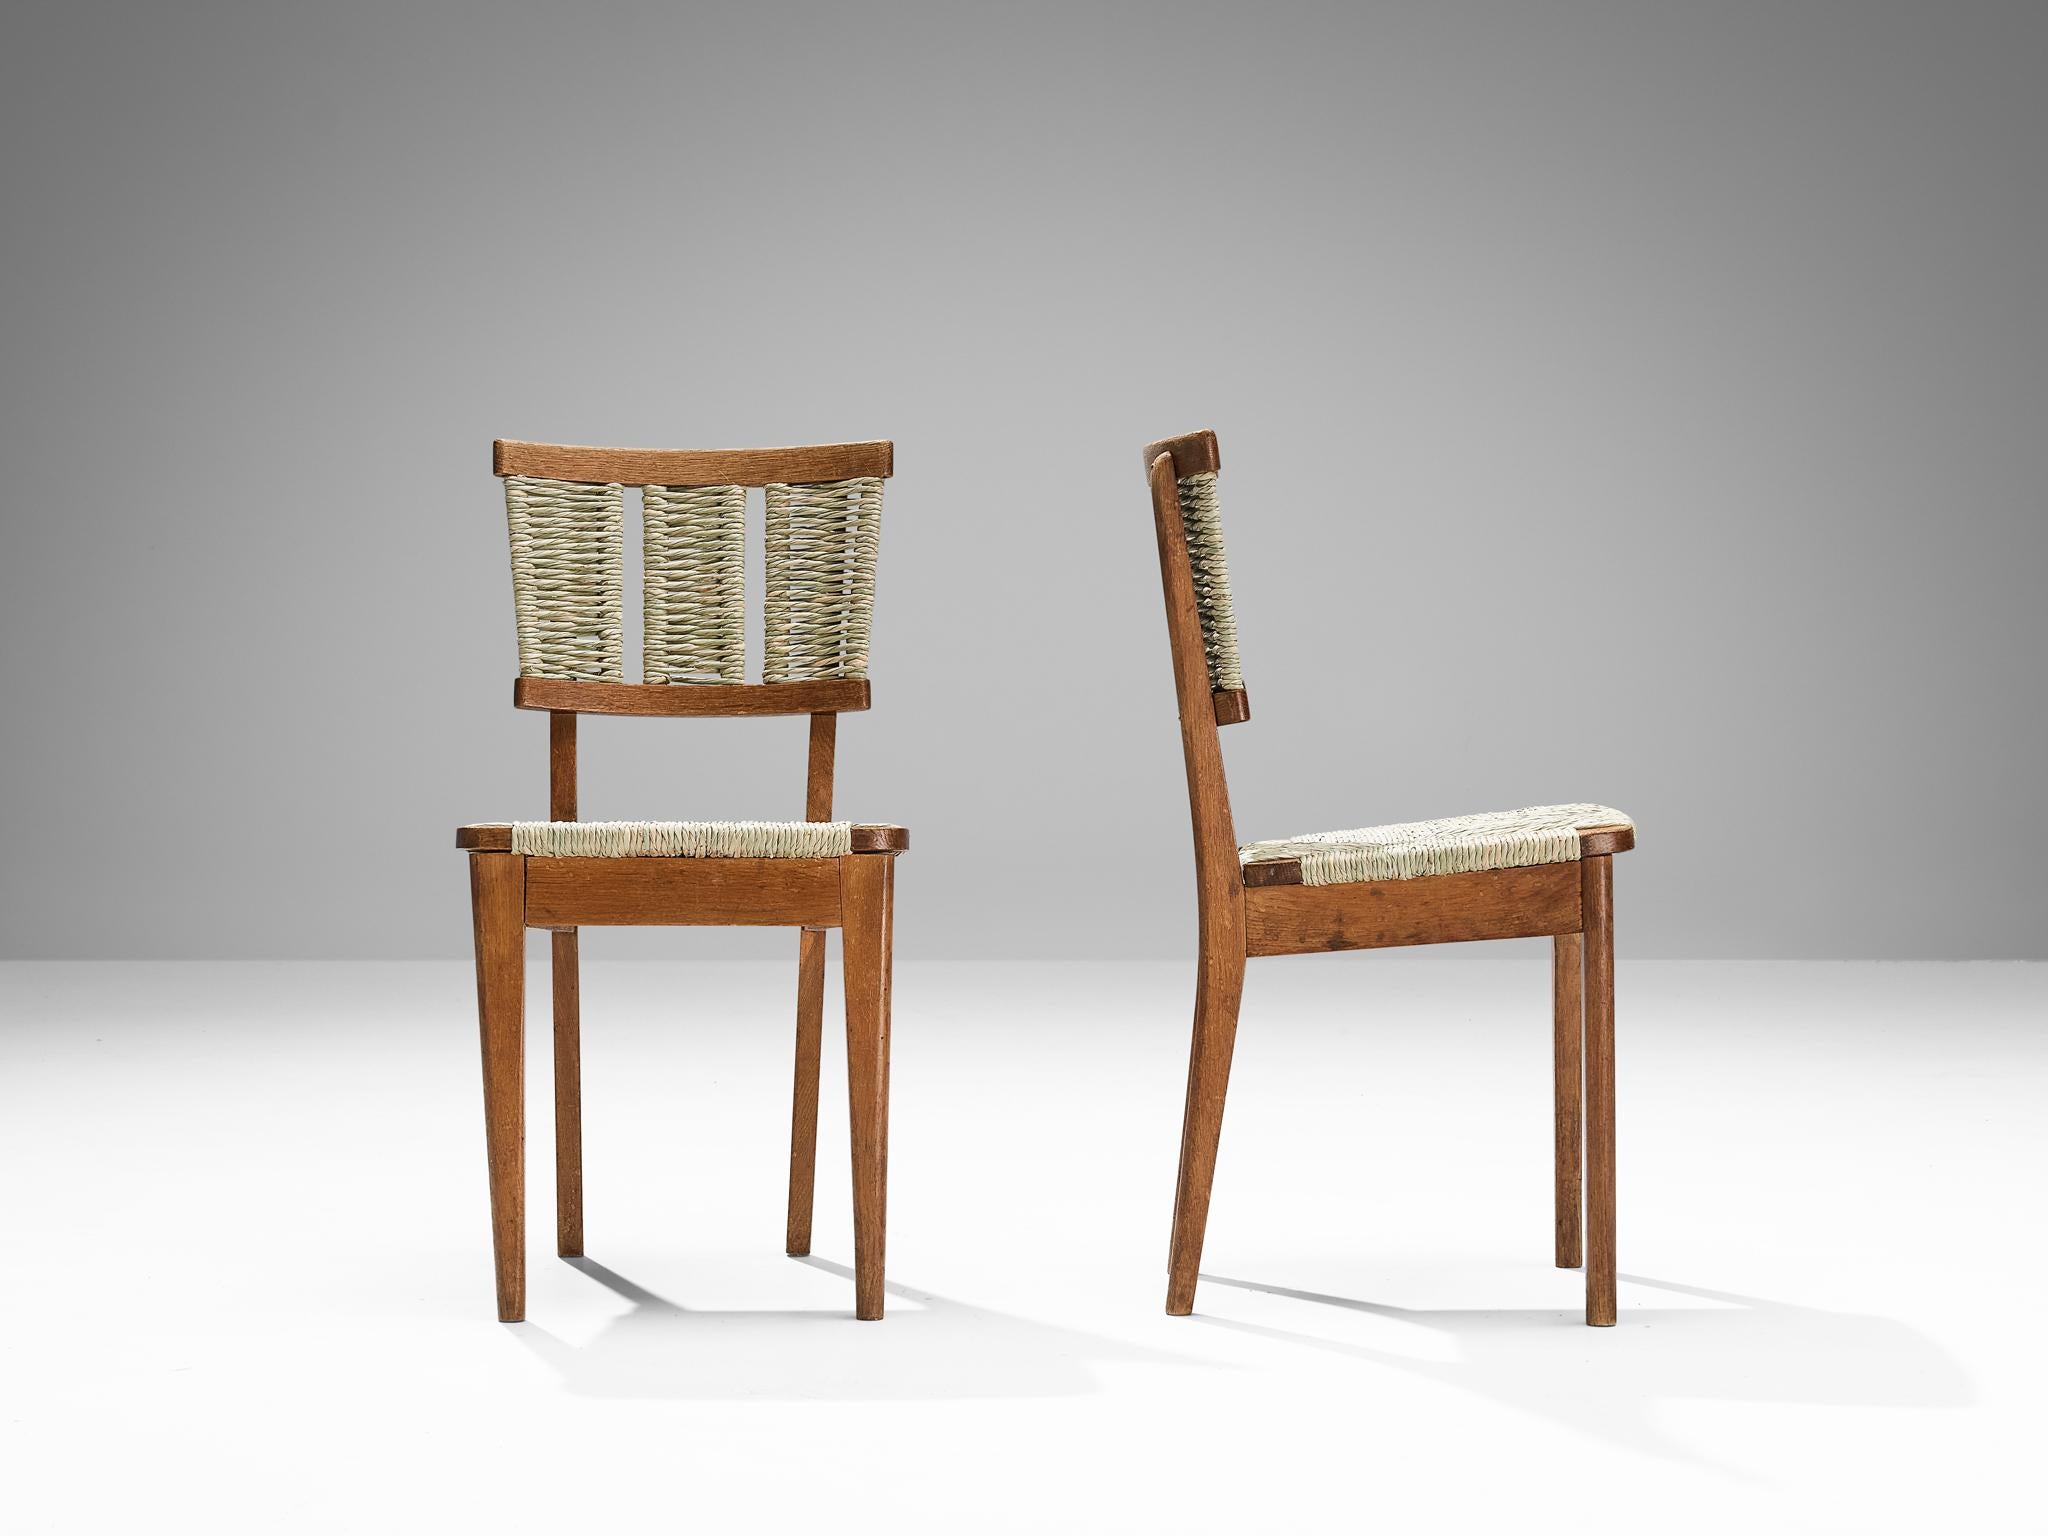 Mart Stam Set of Four Dining Chairs in Oak and Wicker Seagrass  1